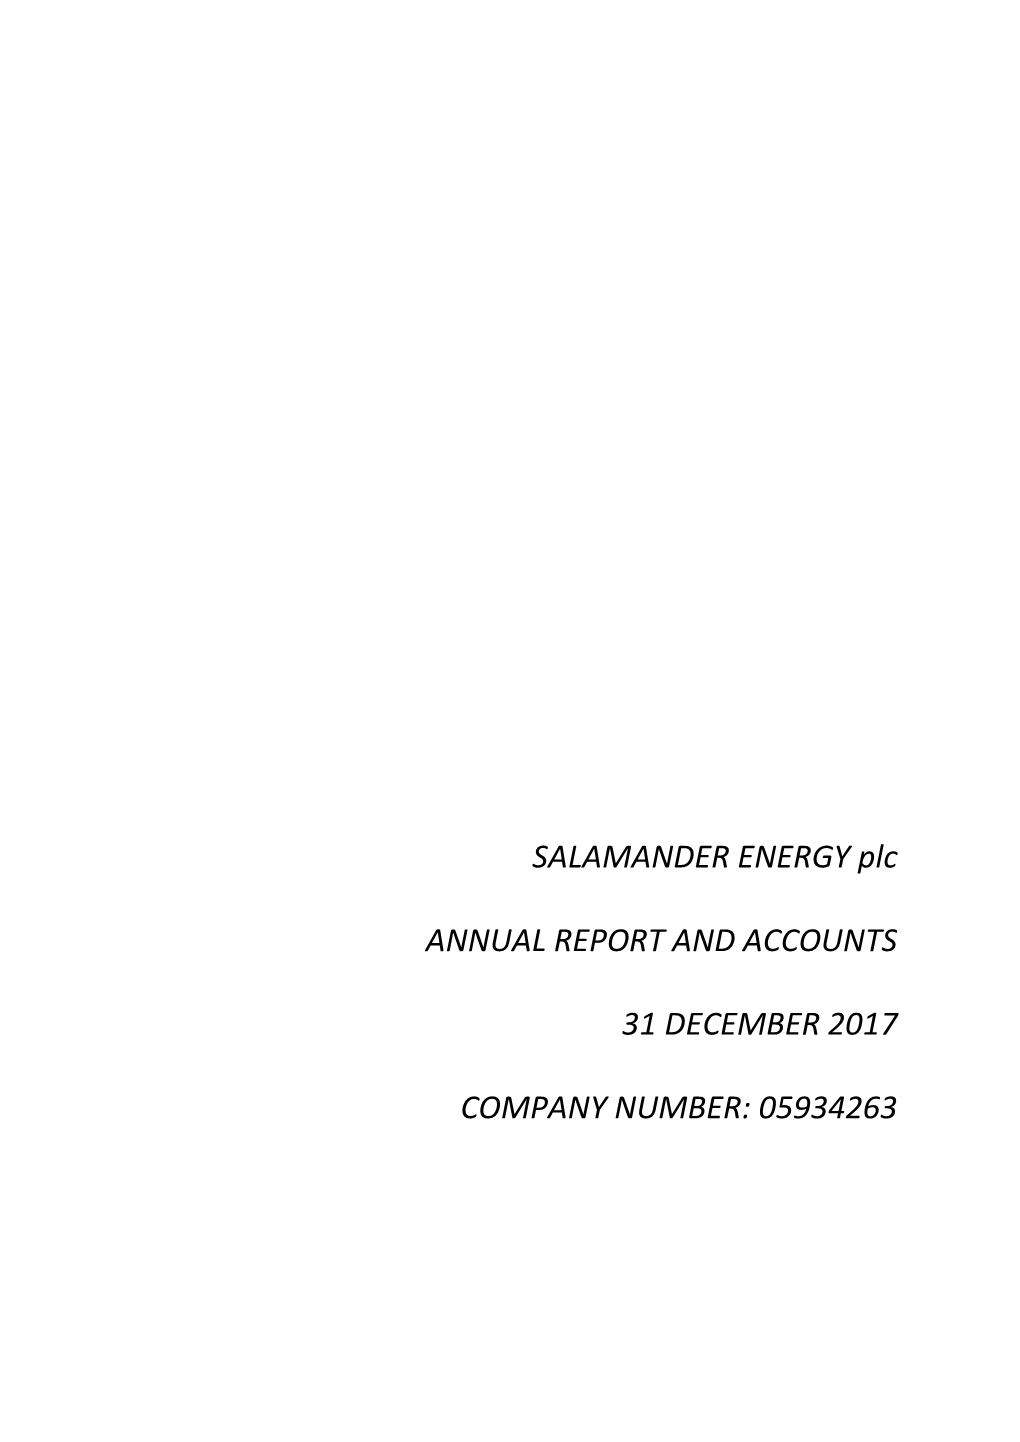 Salamander Energy Plc Annual Report and Accounts for 2017 Page 1